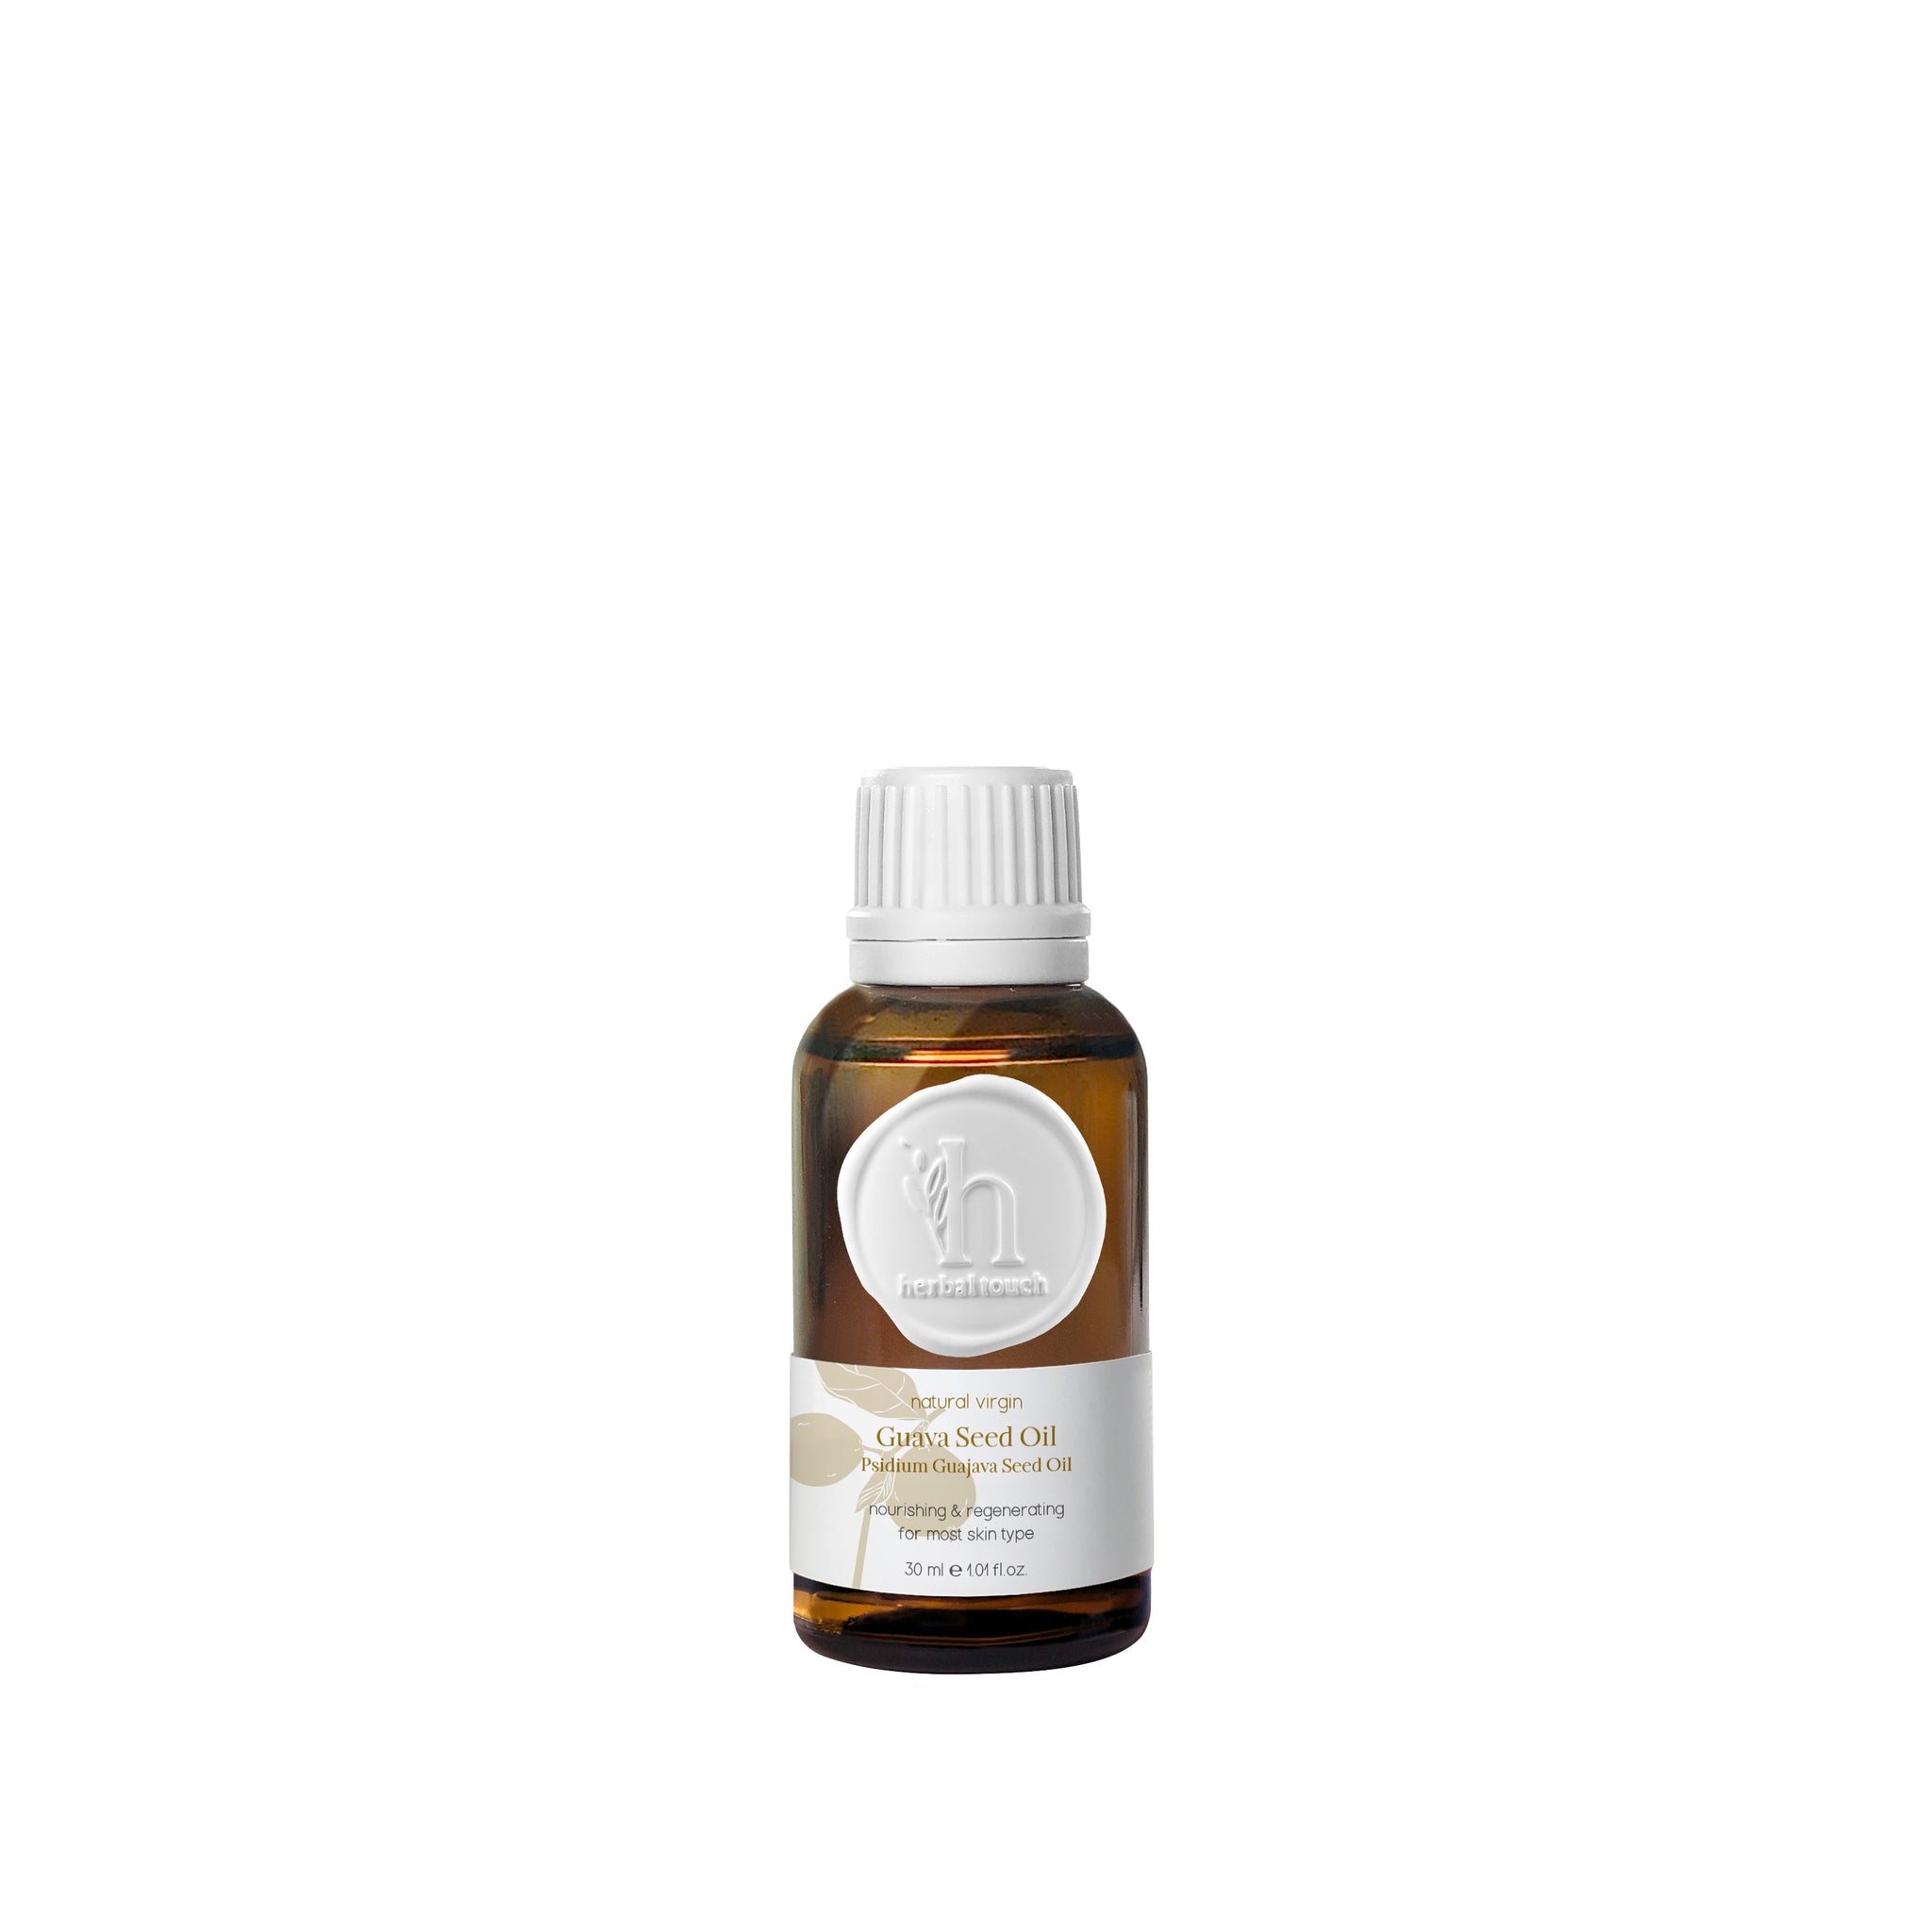 Natural Virgin Guava Seed Oil